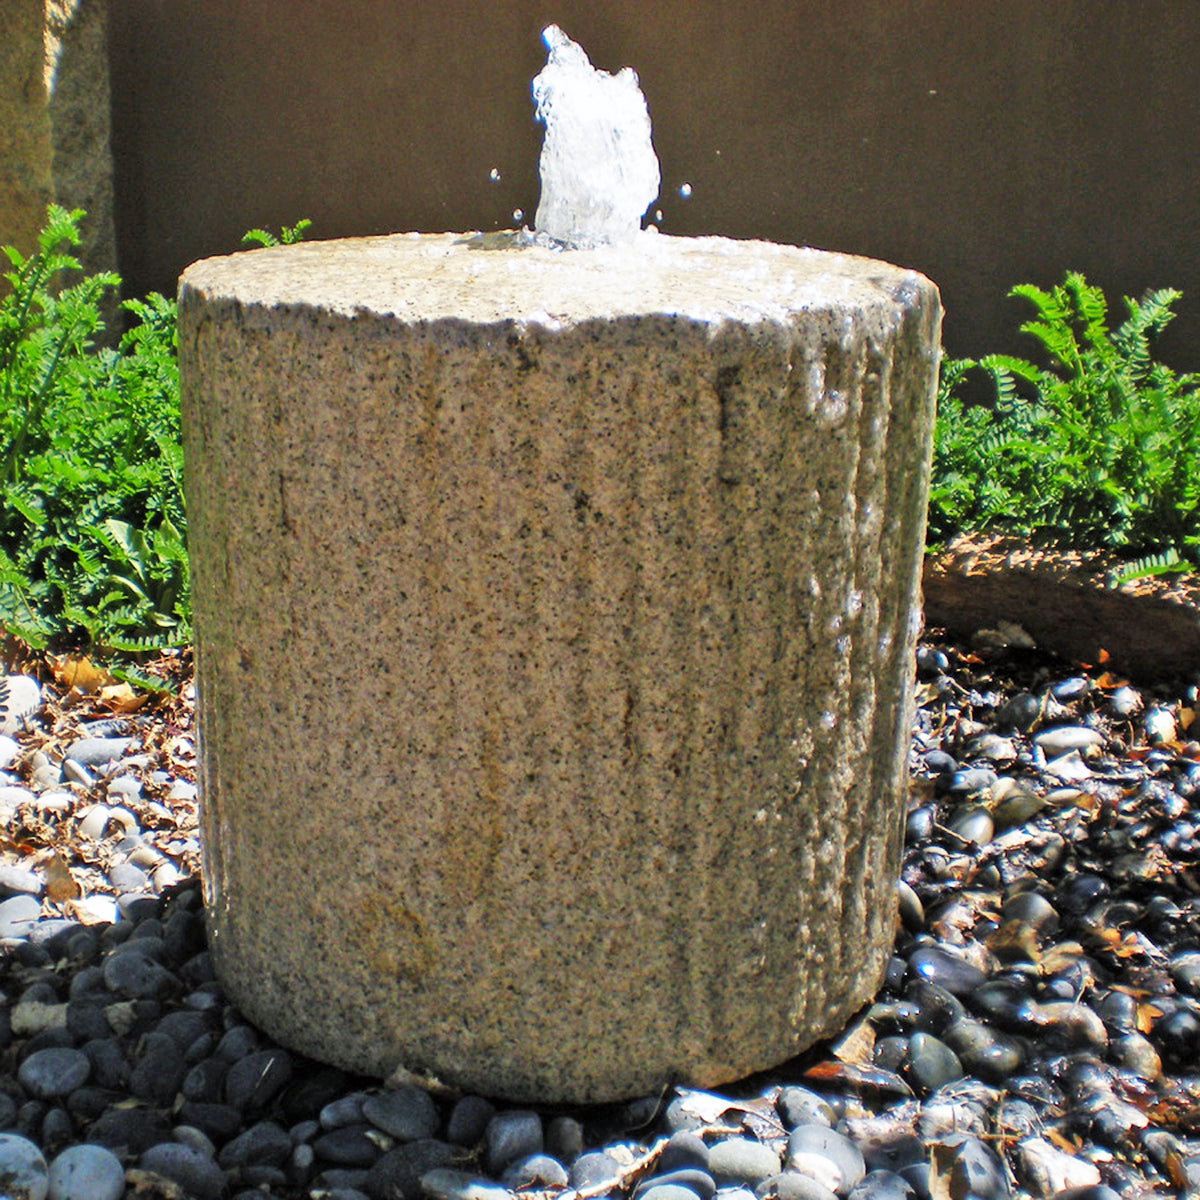 Stone Forest Antique Grindstone installed as garden fountain image 2 of 2